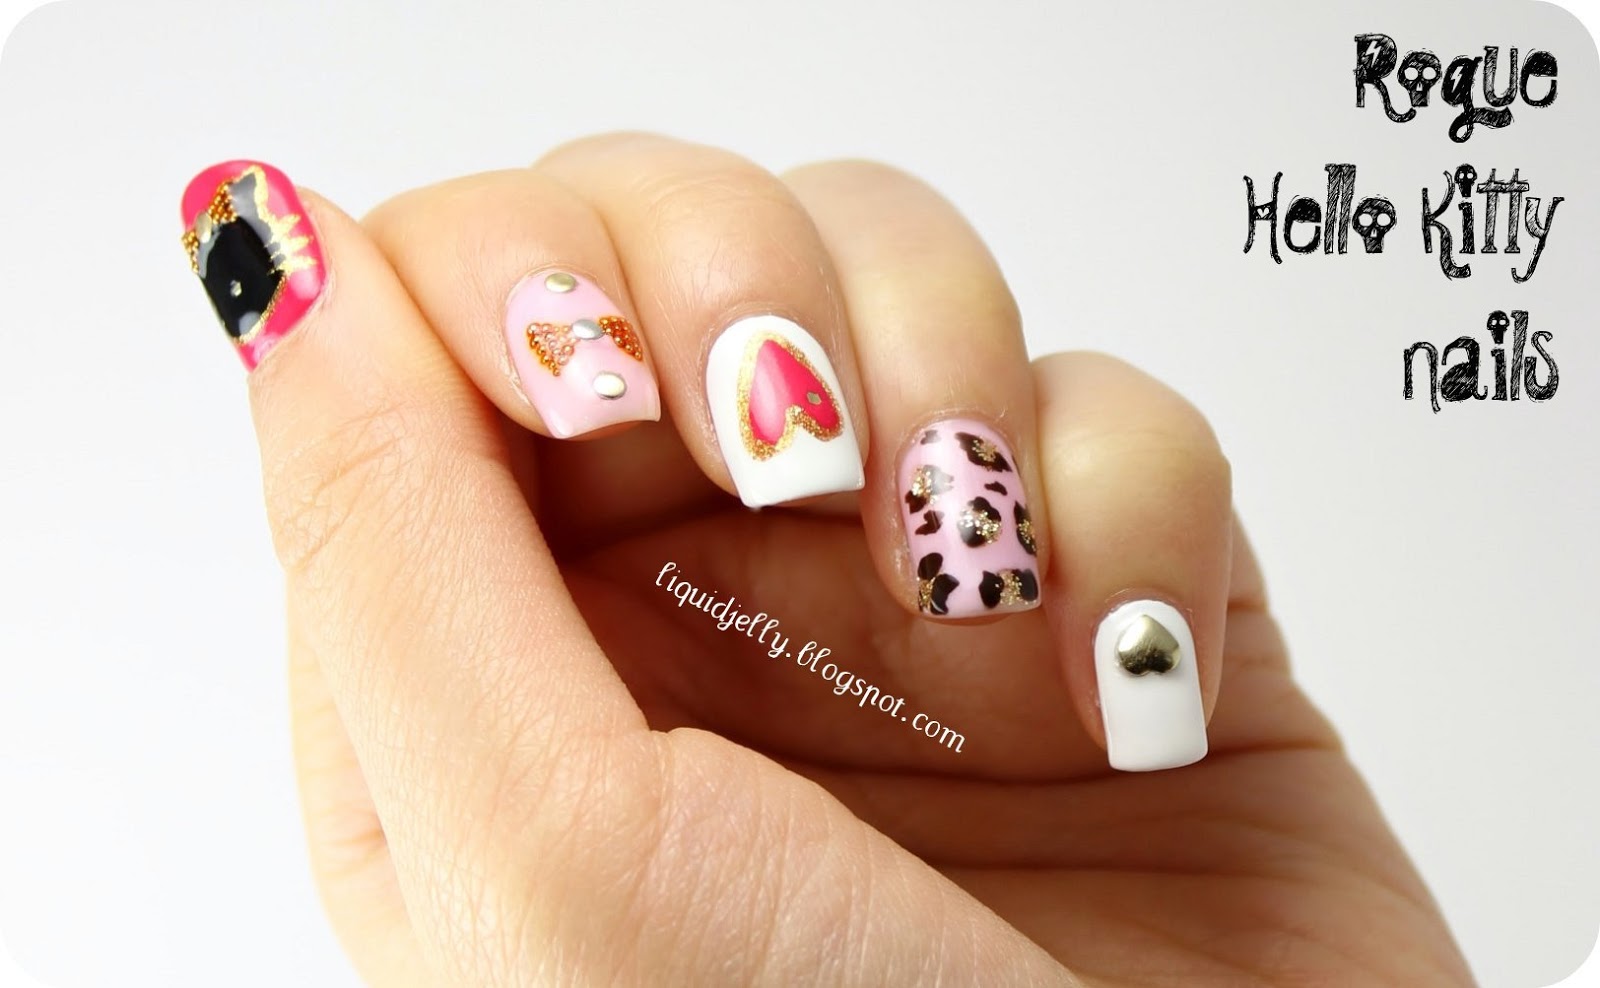 2. Easy Step-by-Step Guide for Kitty Nails - wide 2